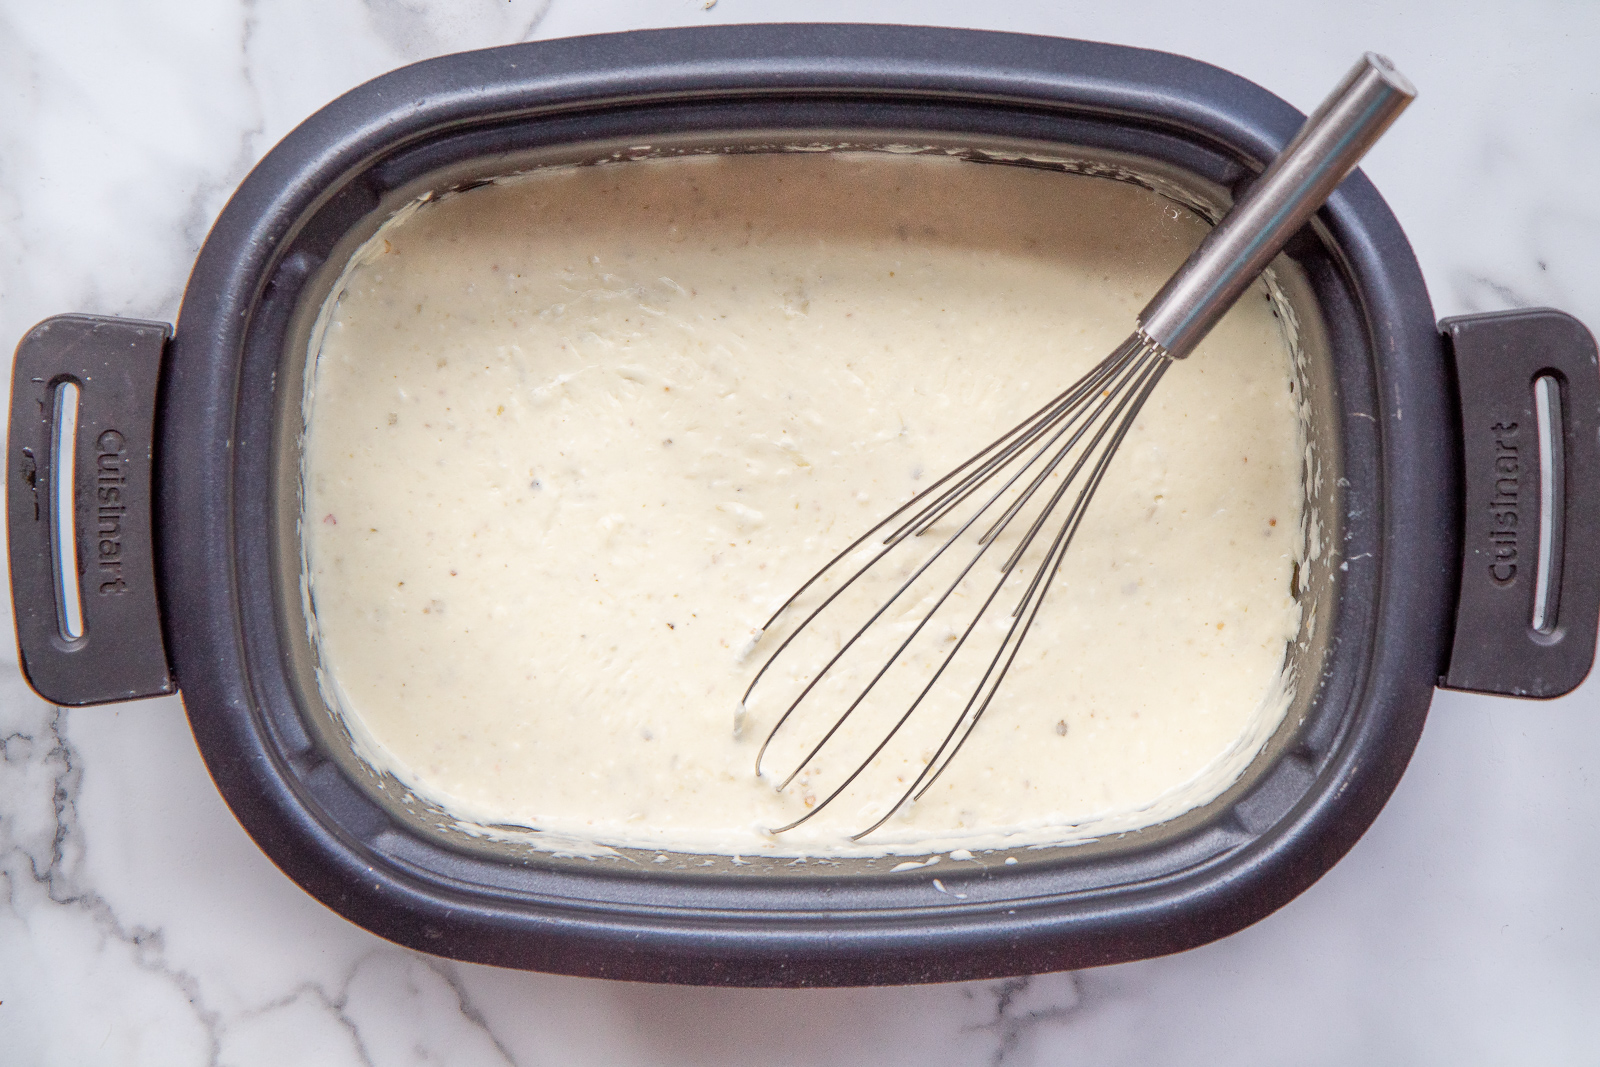 Slow cooker white queso dip